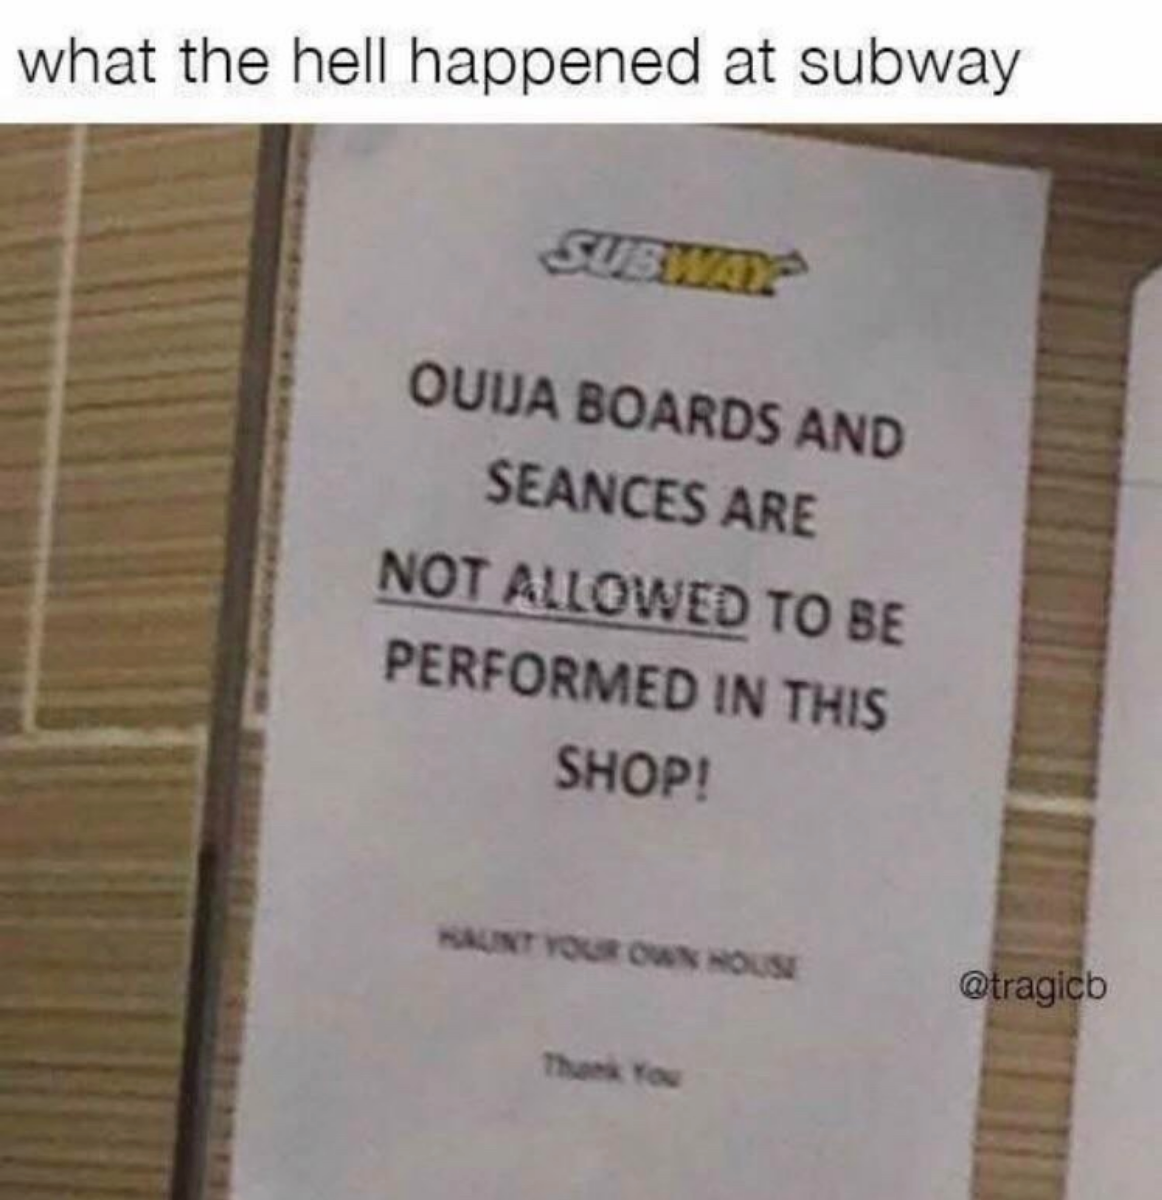 Ouija - what the hell happened at subway Suba Ouua Boards And Seances Are Not Allowed To Be Performed In This Shop! Aunt Your Own House